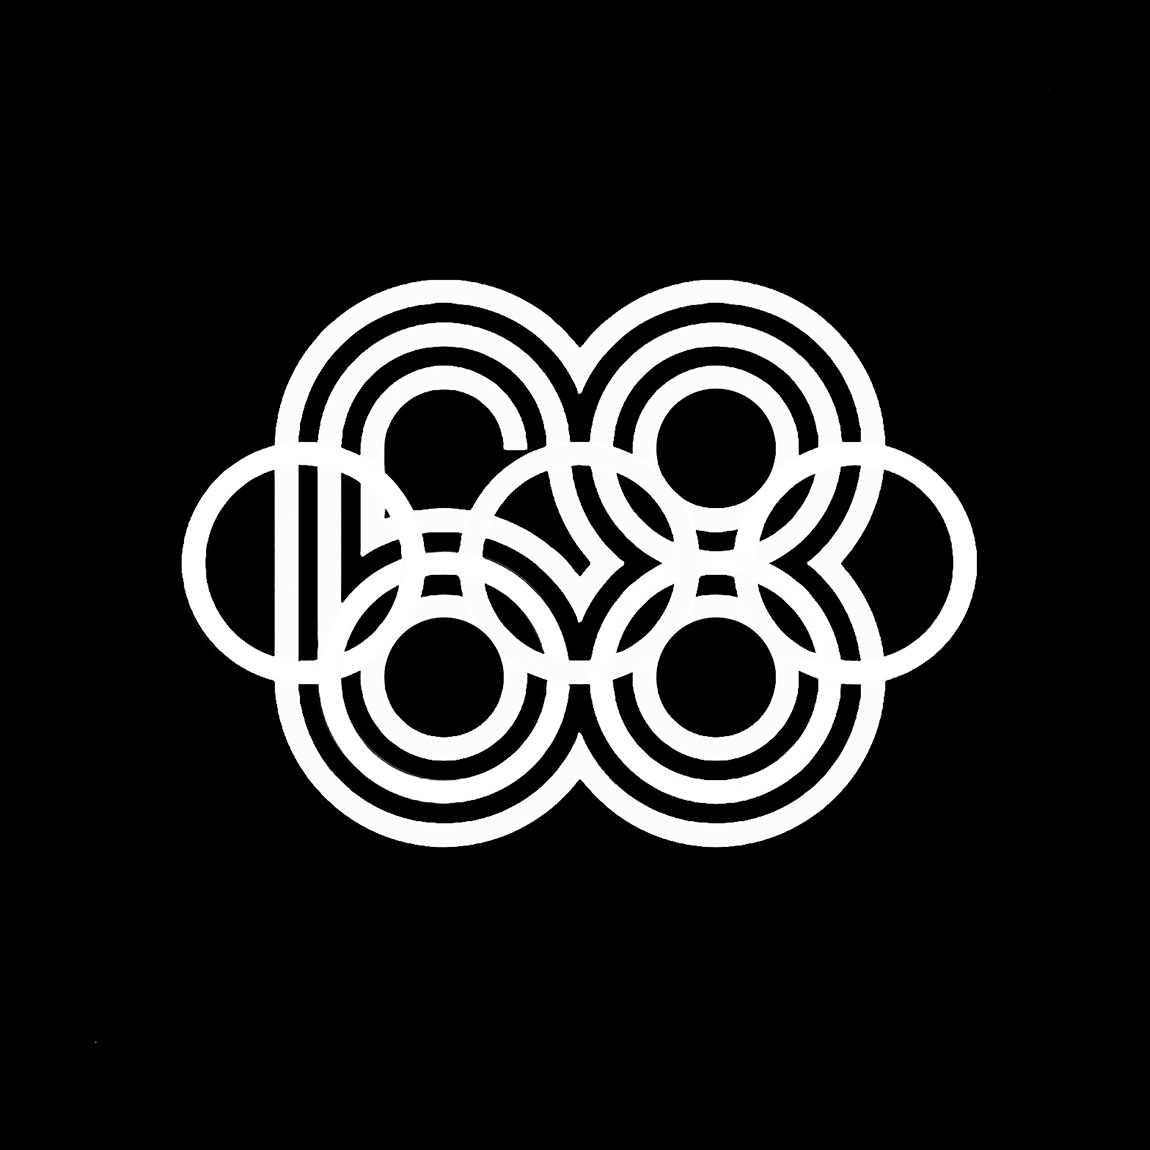 Lance Wyman and Peter Murdoch’s 1966 logo for Mexico ‘68